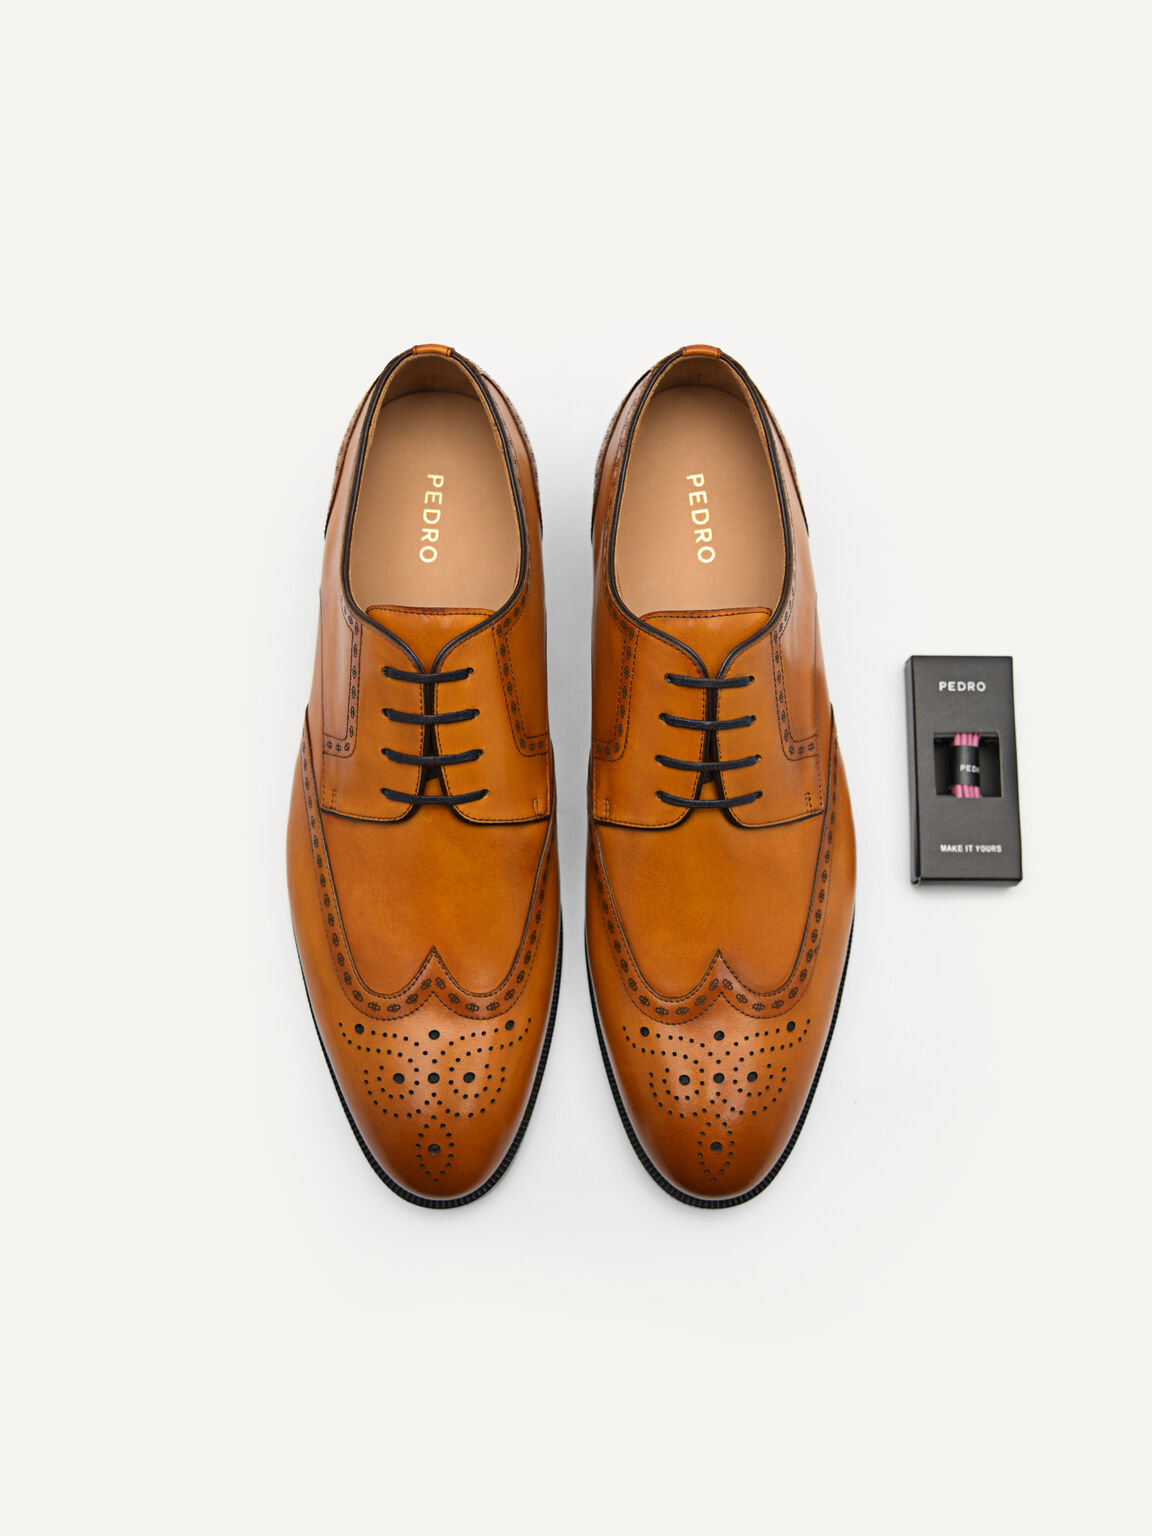 PEDRO Icon Leather Brogue Derby Shoes, Camel